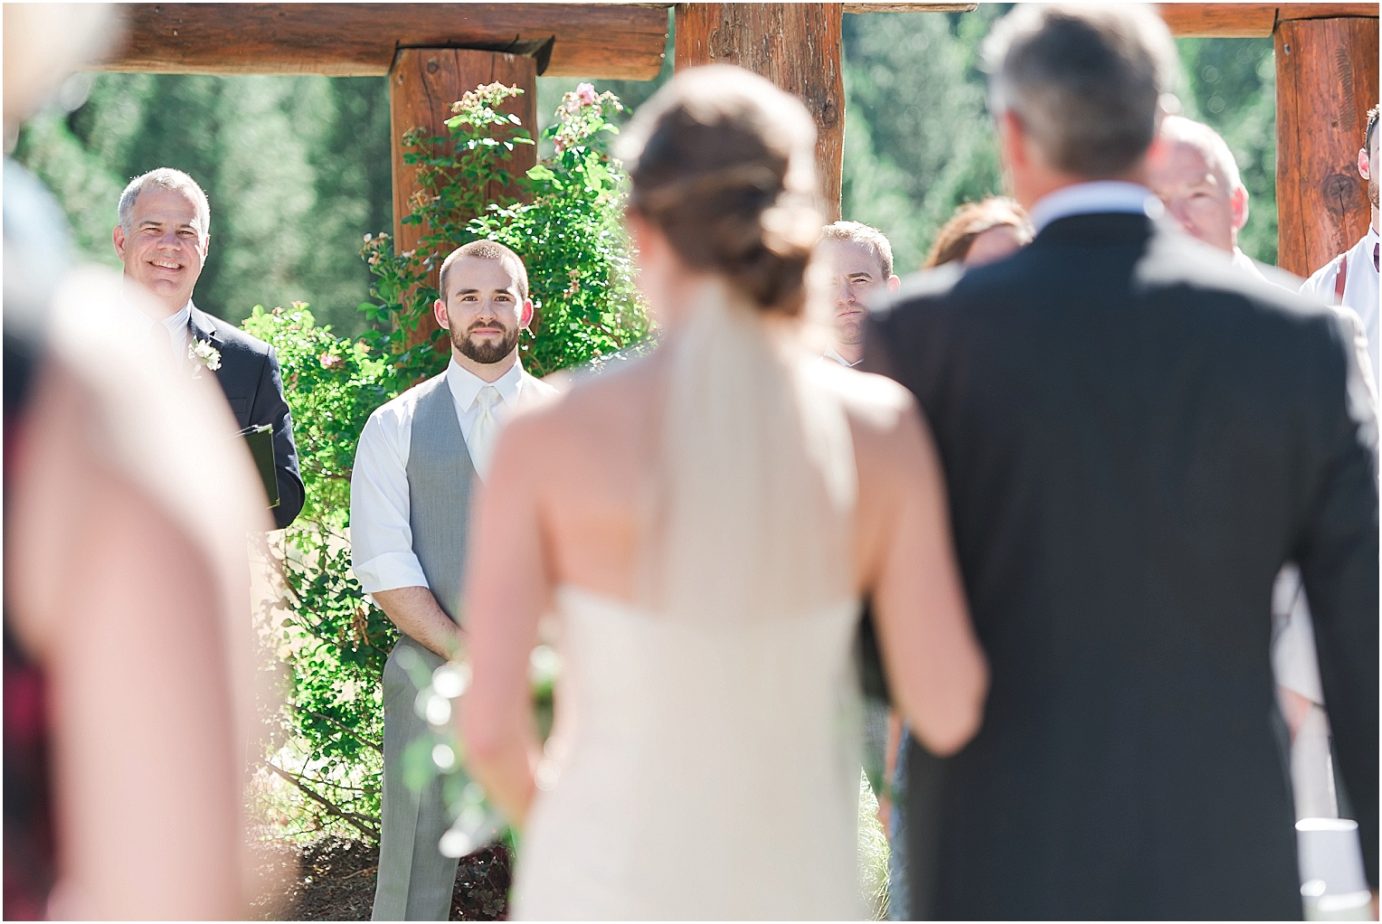 Pine River Ranch Wedding Leavenworth WA Matt and Kelsey outdoor ceremony in the mountains